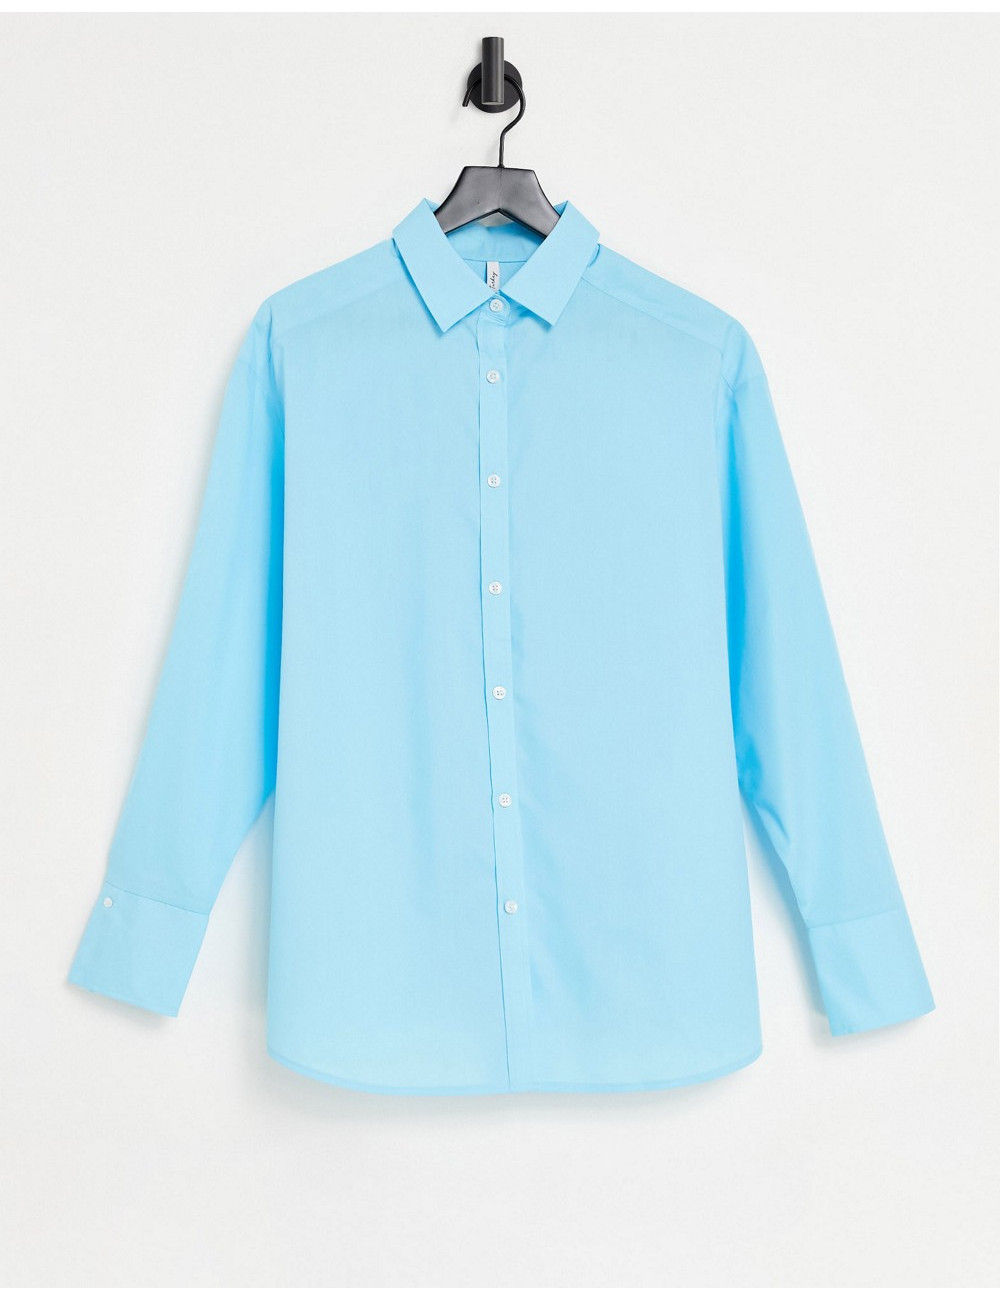 ASYOU oversized shirt with...